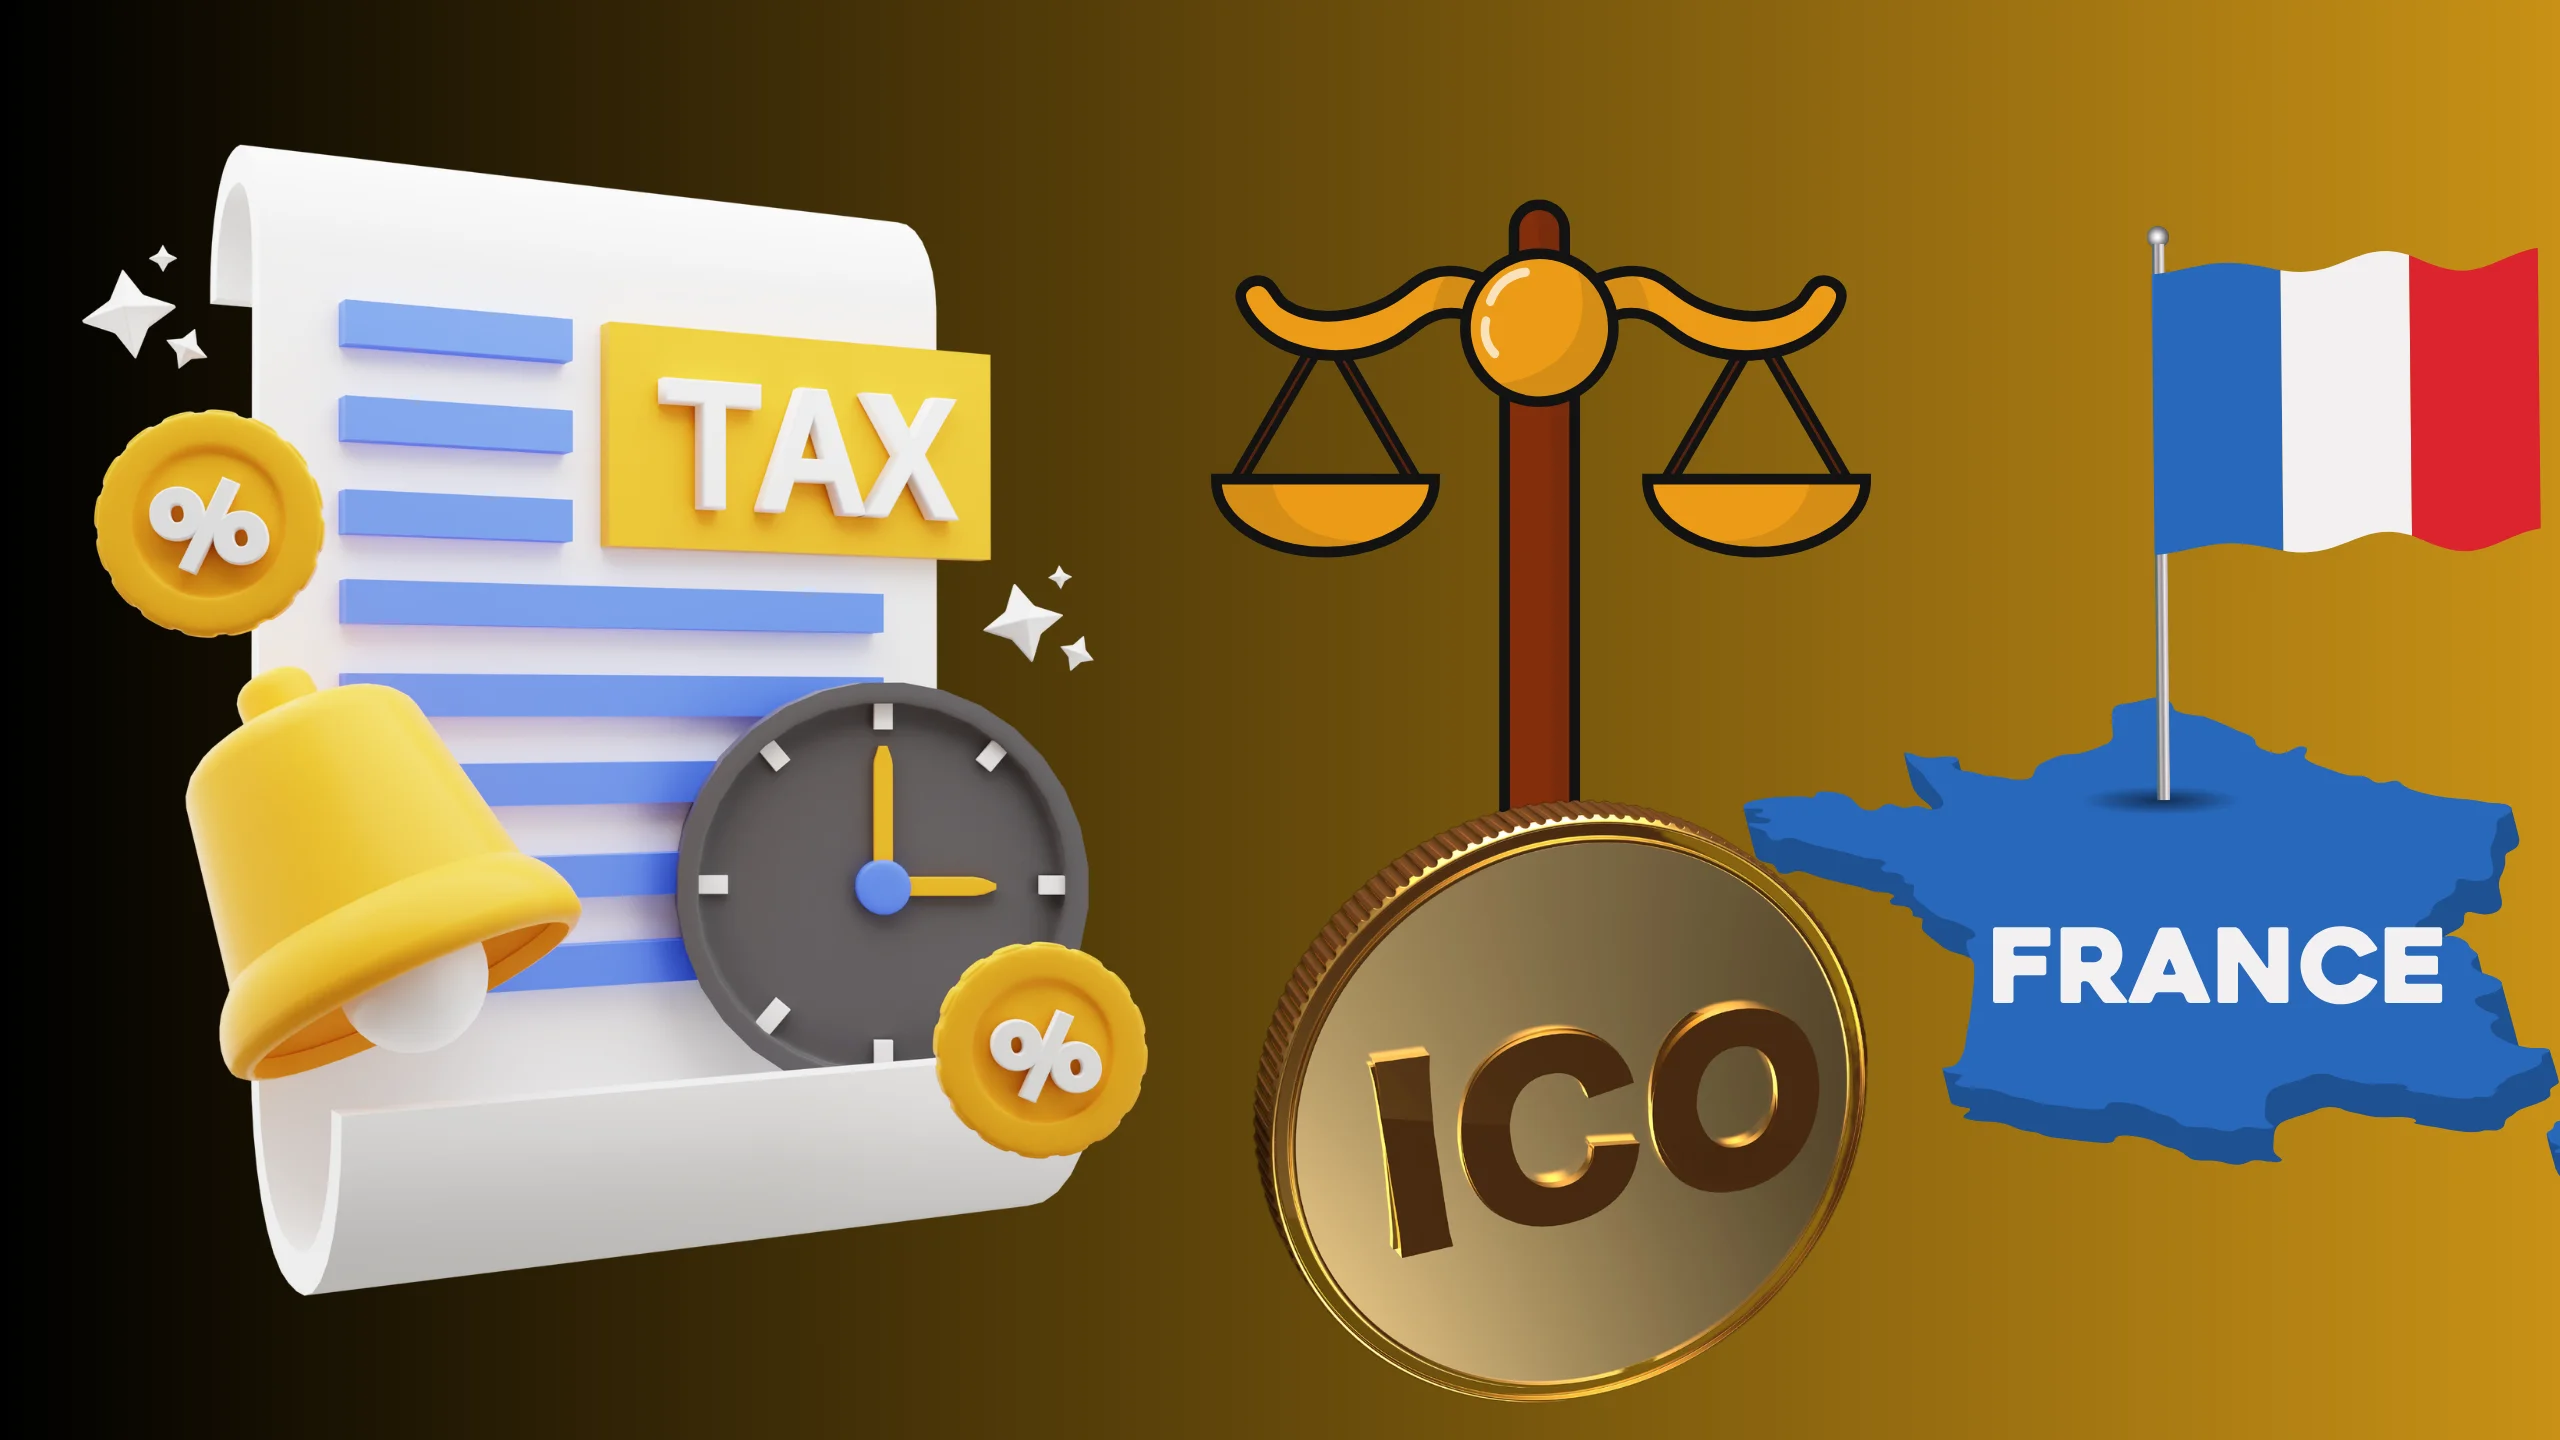 Illustration of tax considerations for ICOs in France, including regulatory compliance, reporting obligations, and tax liabilities. Highlights key issues such as capital gains, income reporting, and French tax authority guidelines for cryptocurrency transactions.